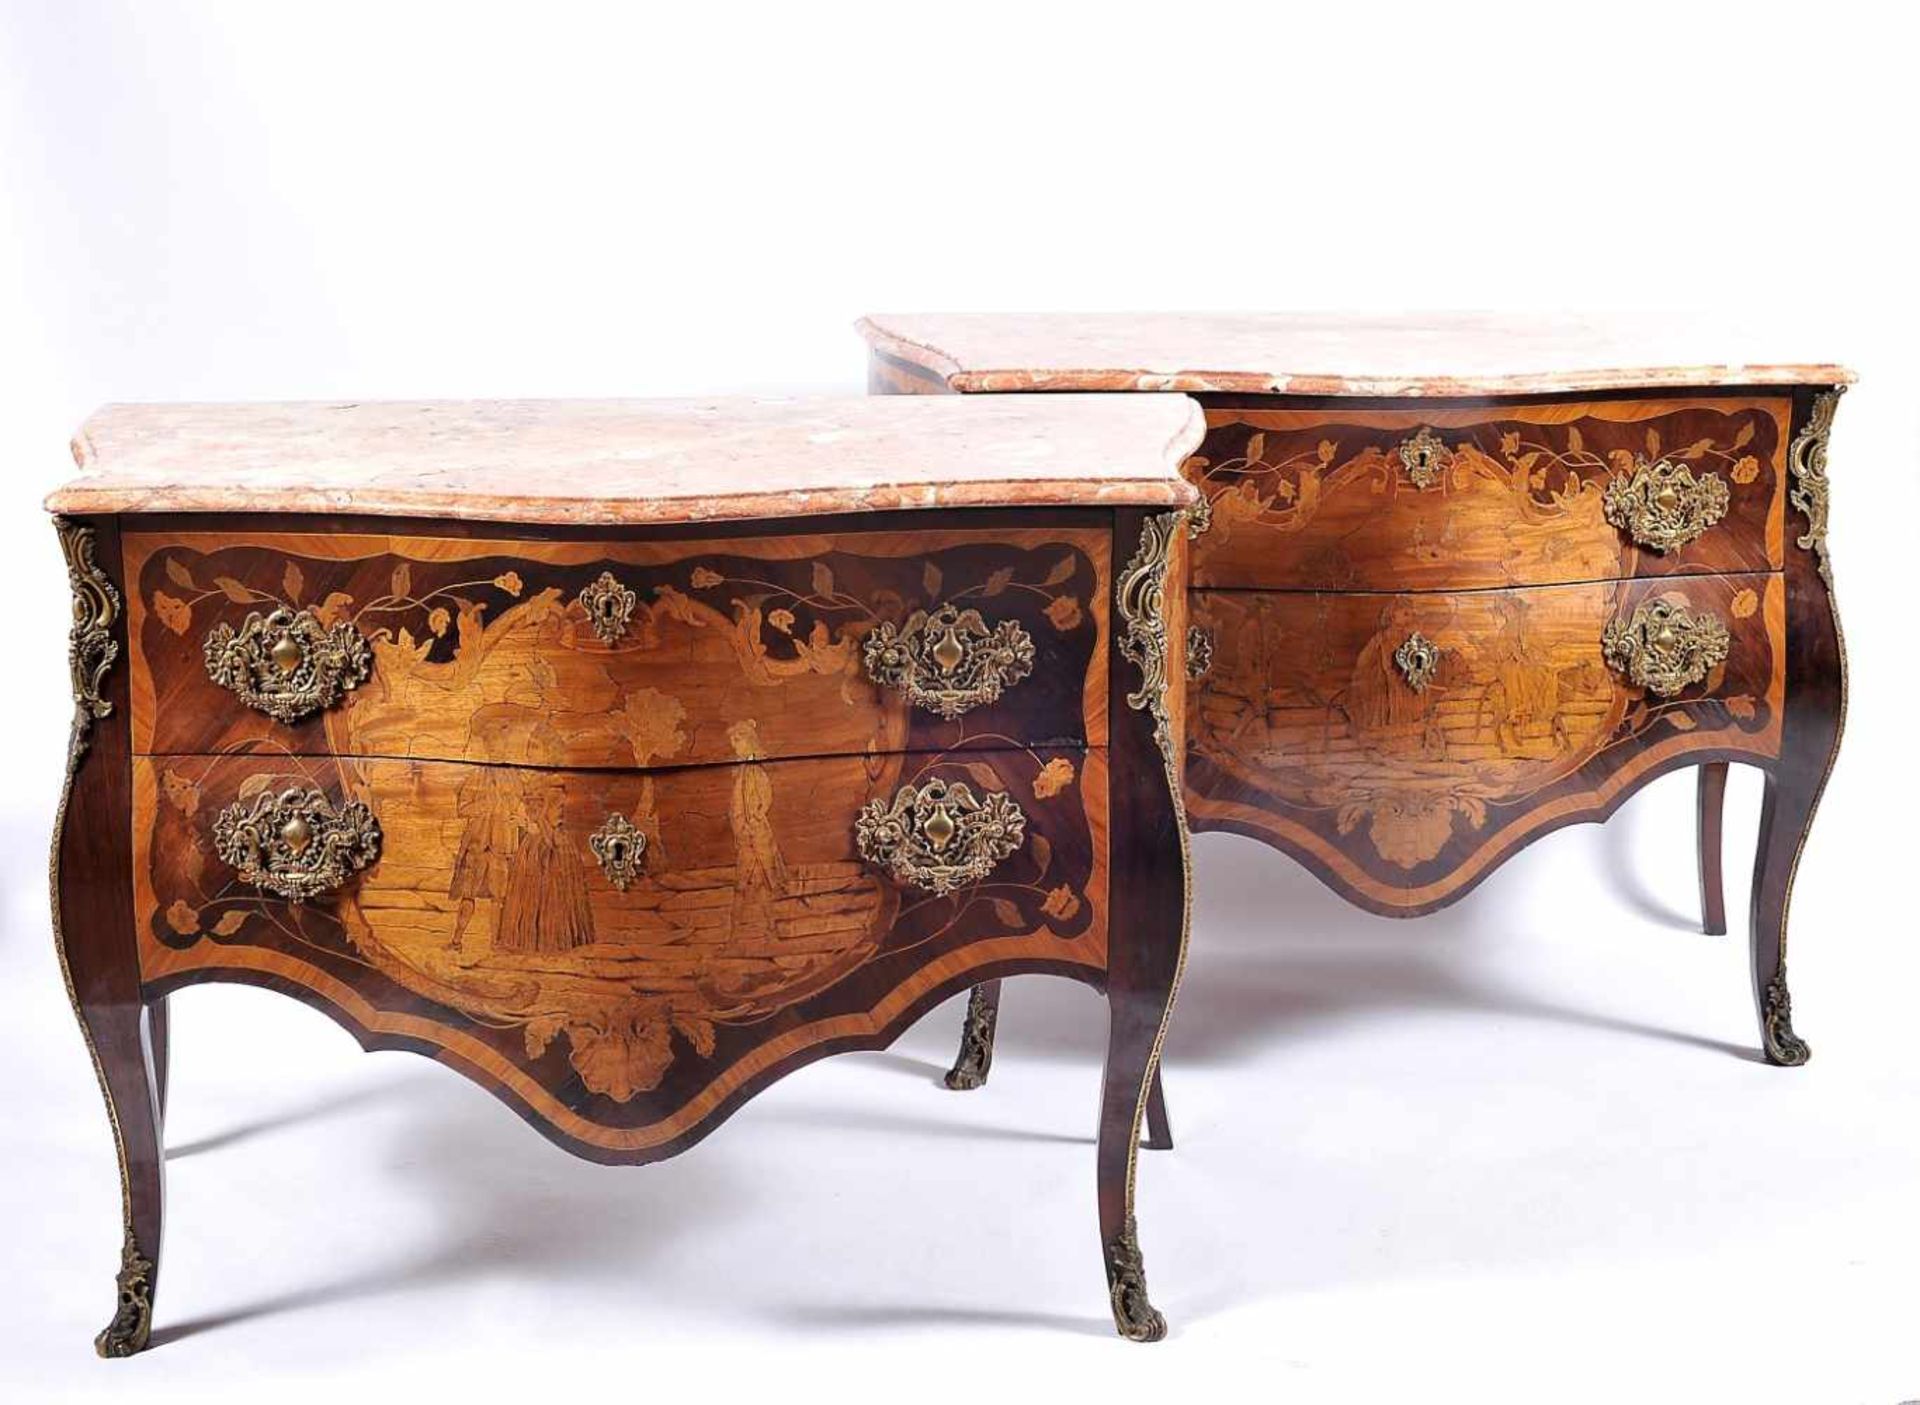 A Pair of CommodesA Pair of Commodes, Louis XV style, Brazilian rosewood, mahogany, boxwood and